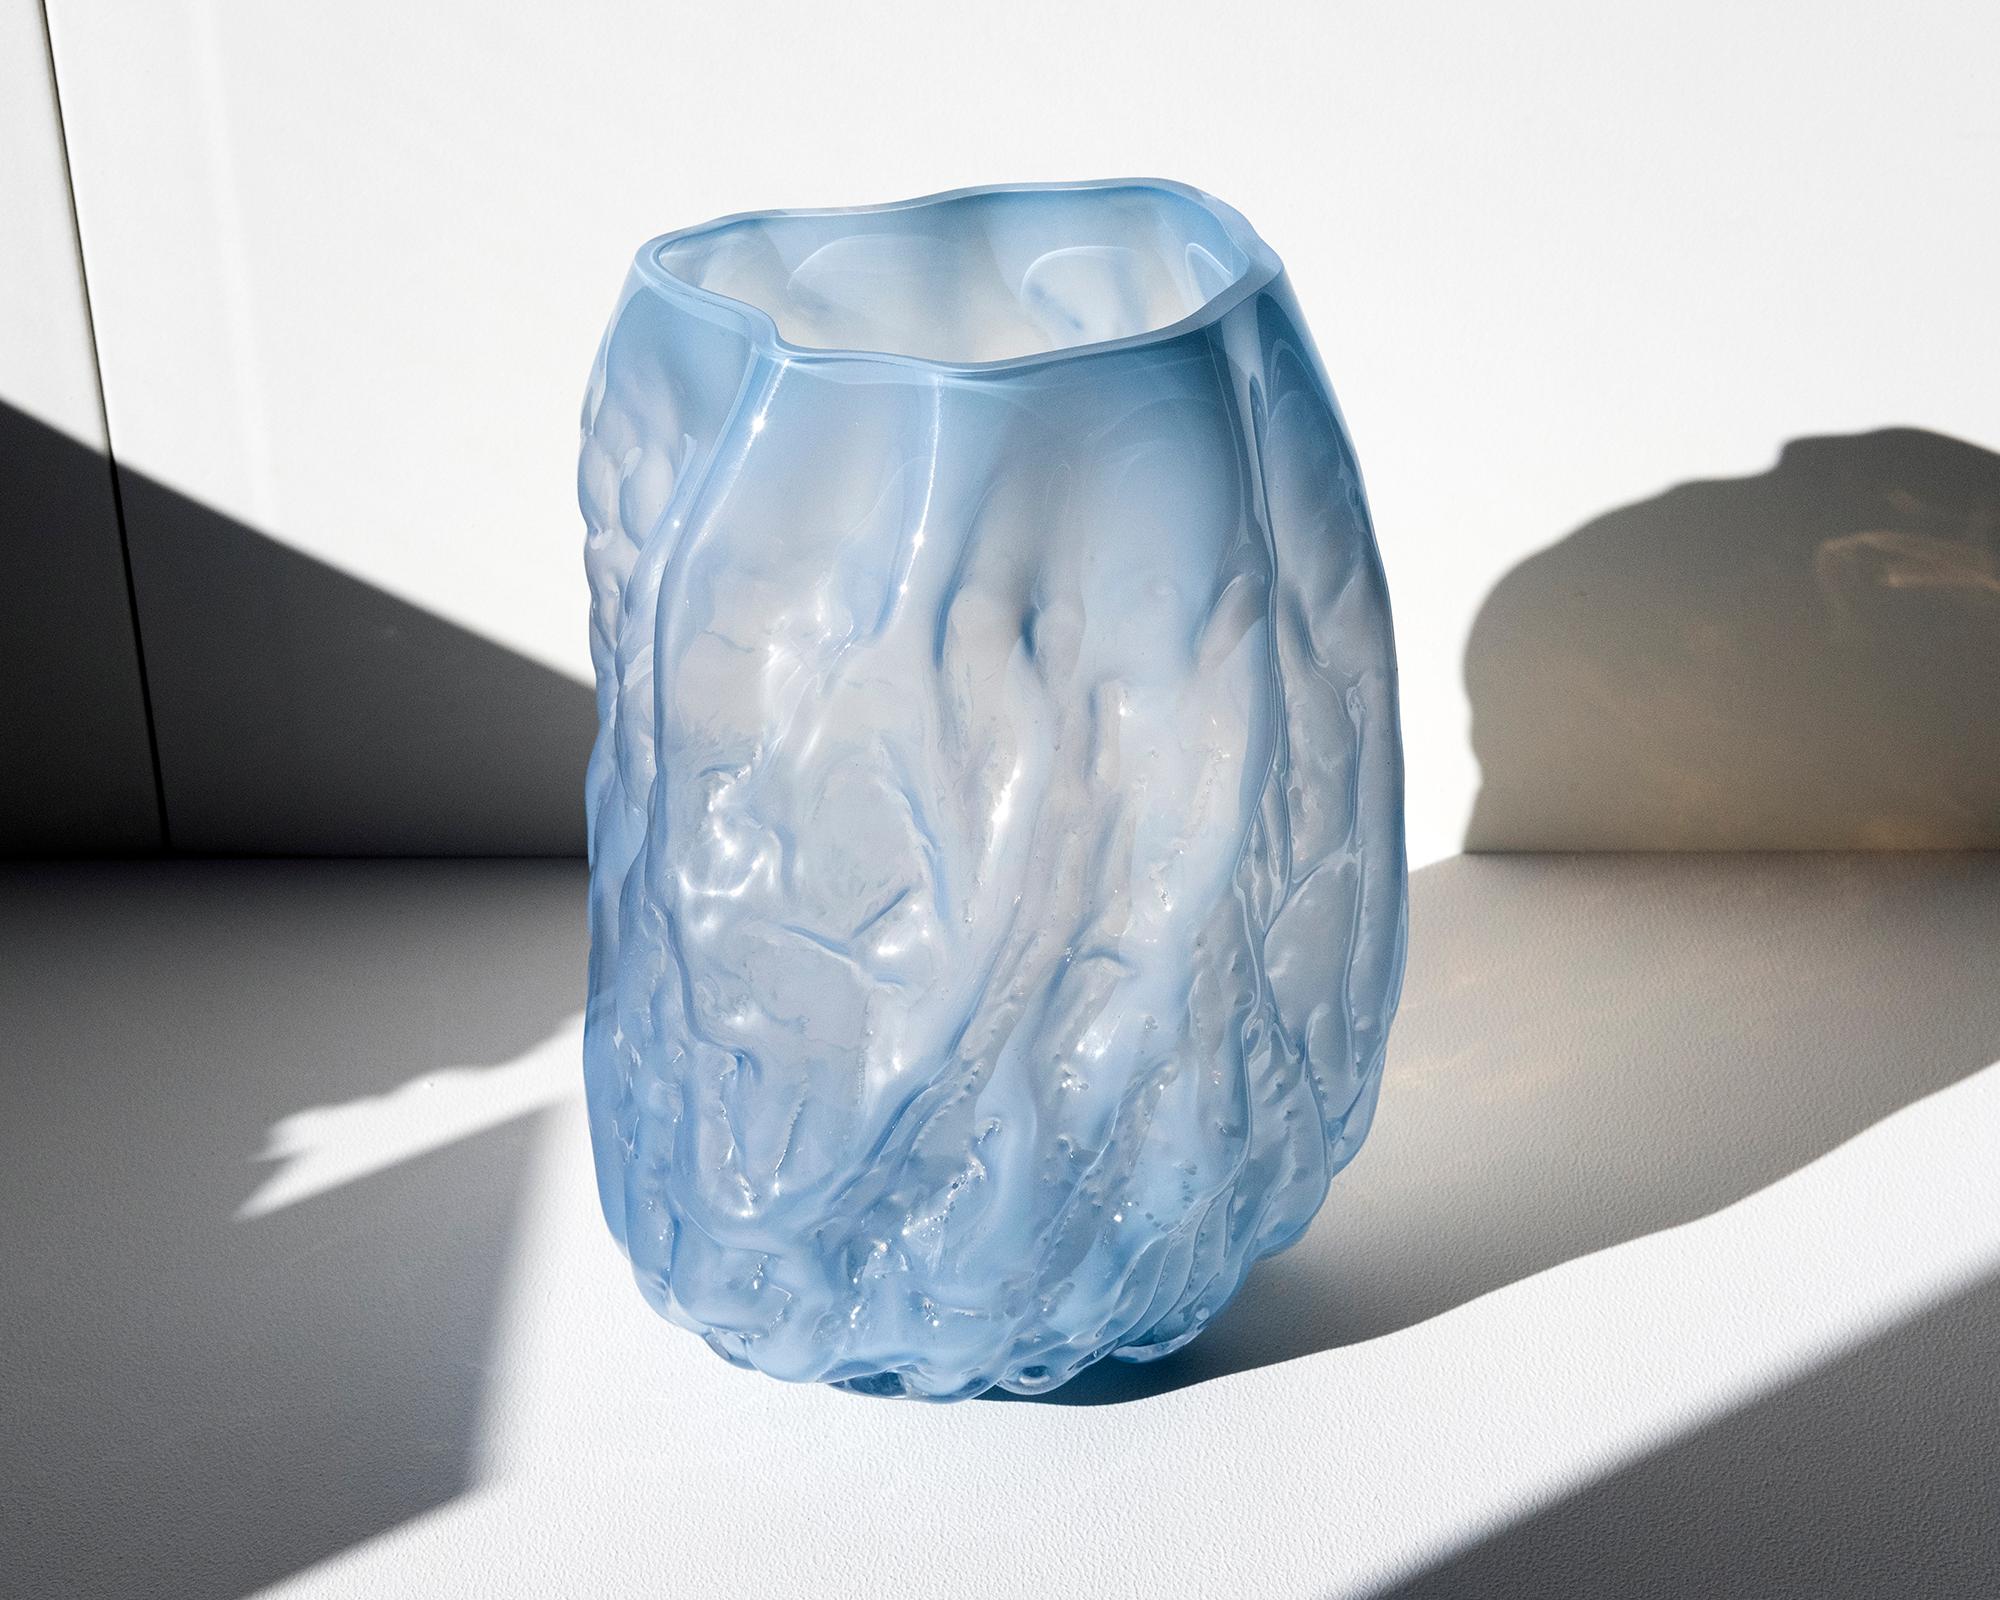 Unique Piece. Hand blown glass vase made in forms of soft clay that are shaped by hand just before blowing the glass into the form. The process makes all pieces unique and gives them a wrinkled surface. NOTE, small parts of clay from the production